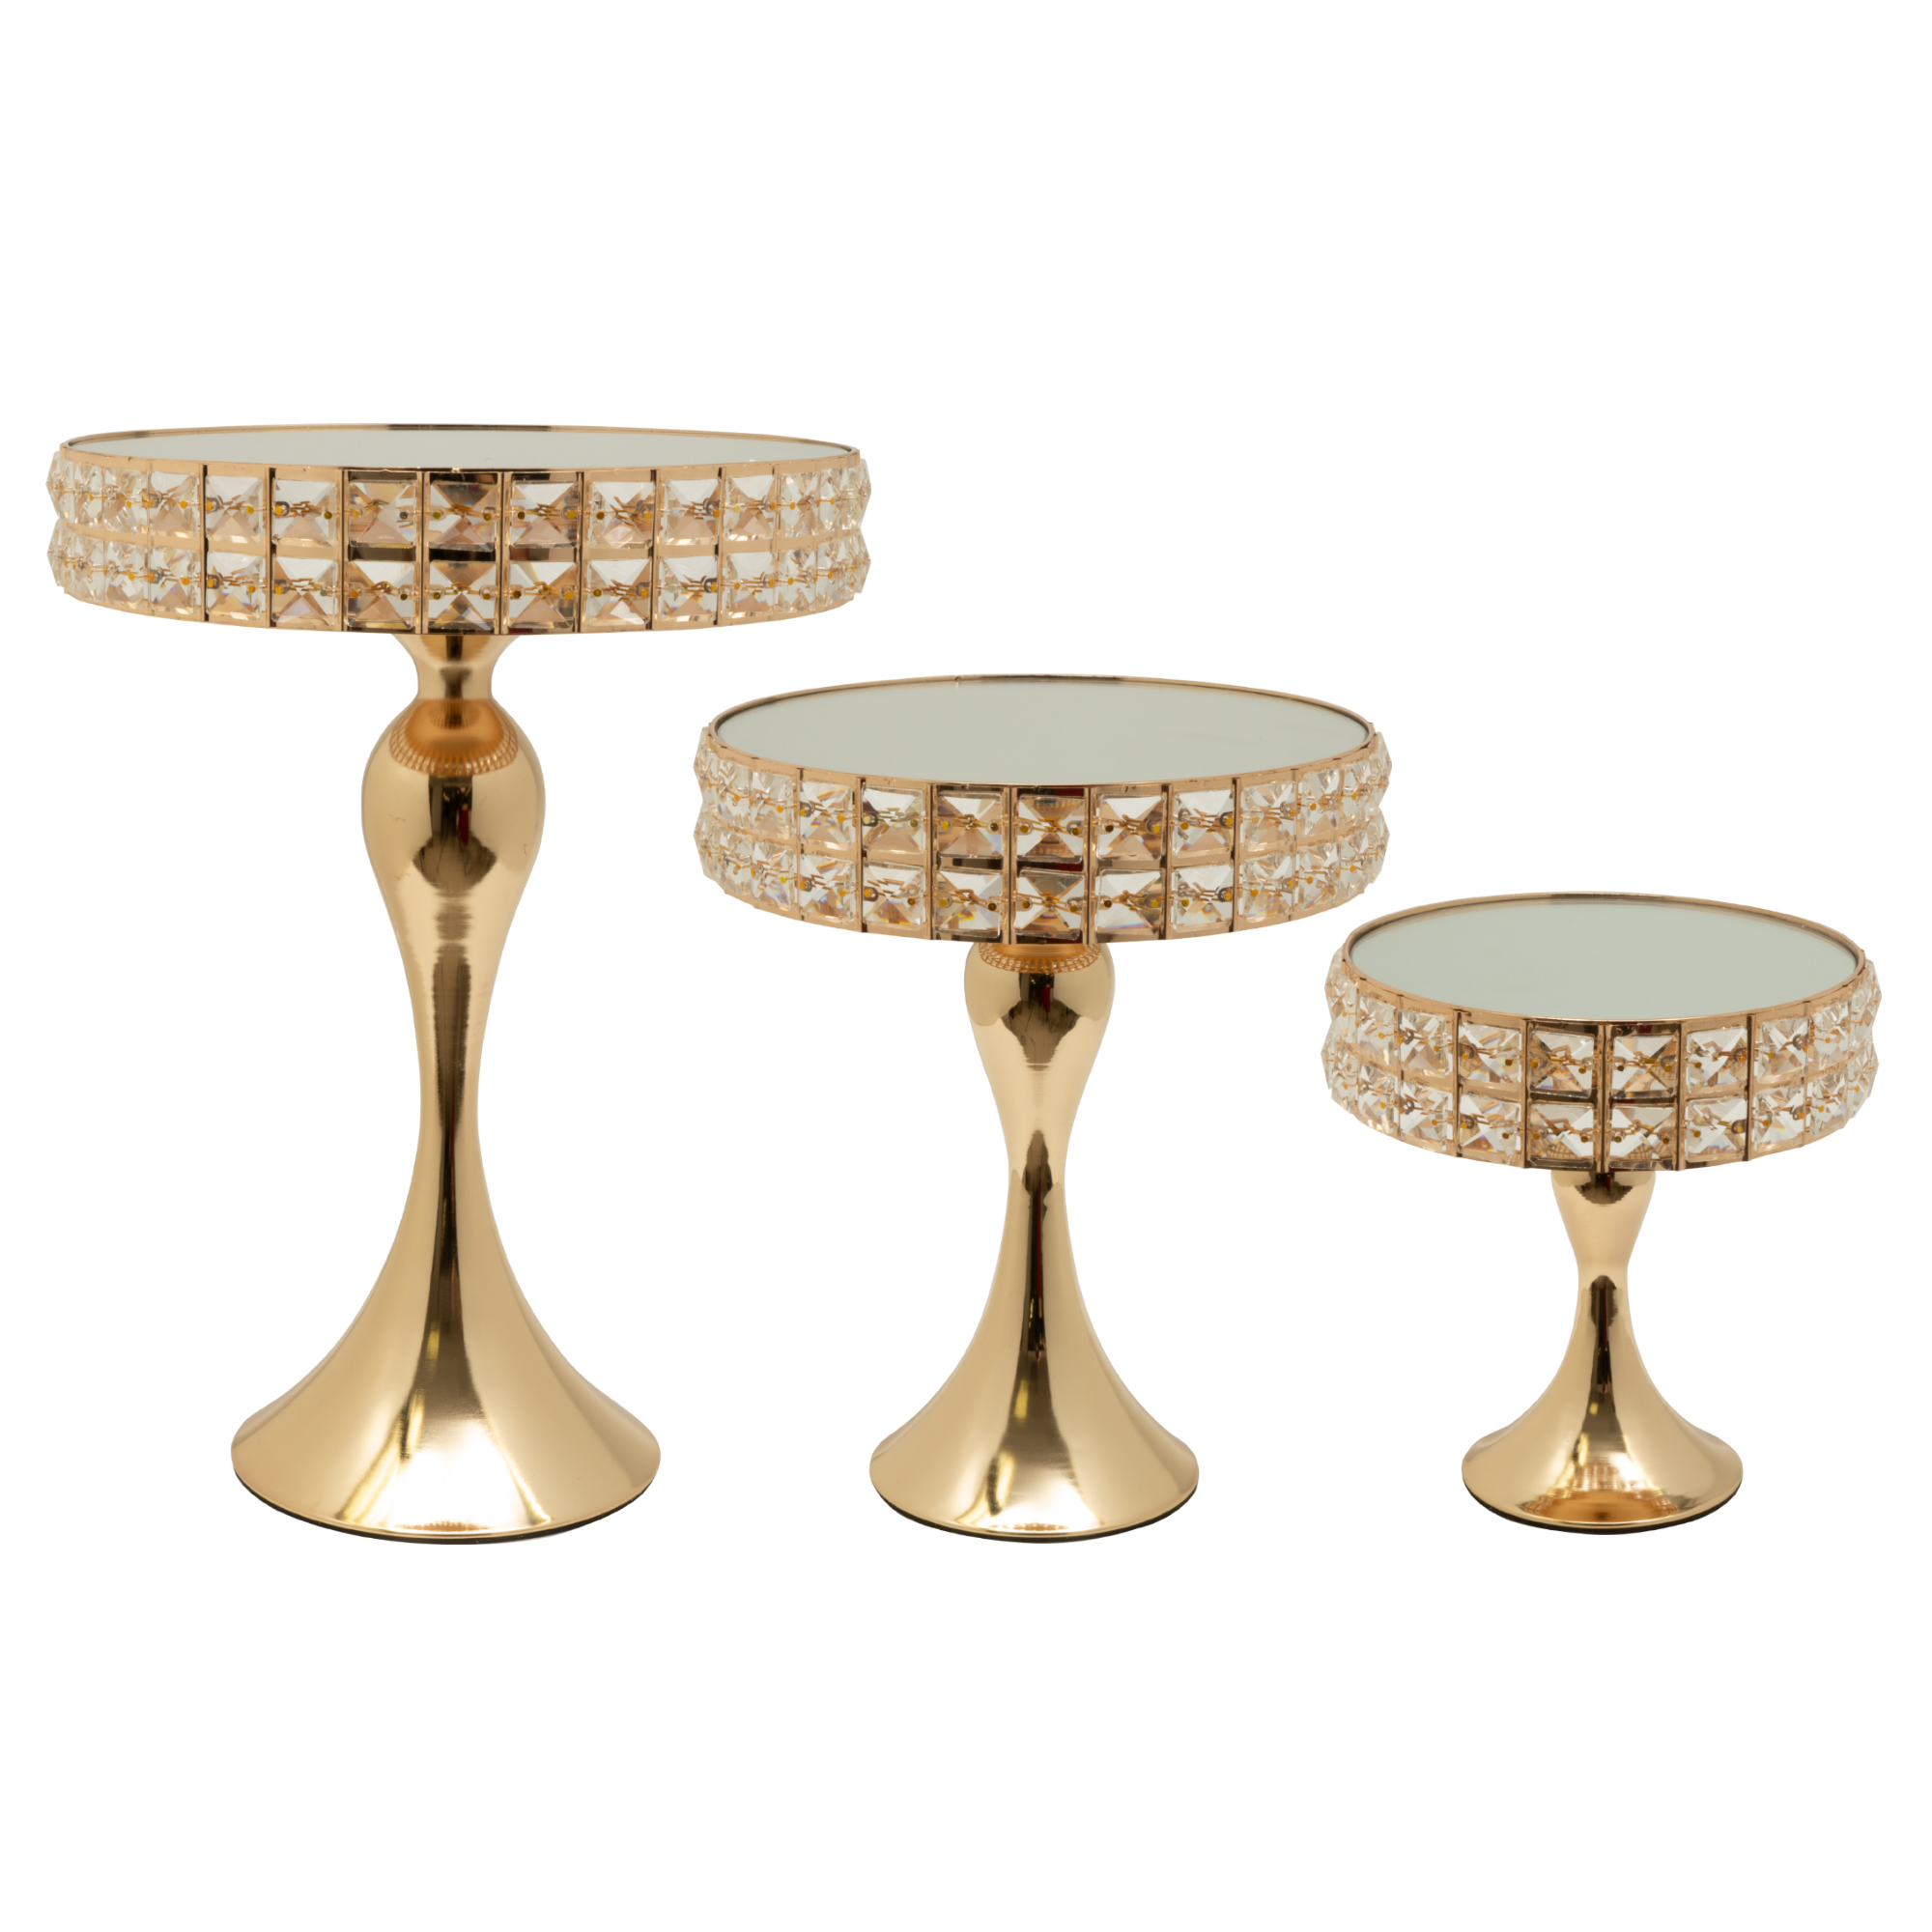 Metal Round Crystal Embellished Cake Stand With Mirror Top 3pc/set - Gold